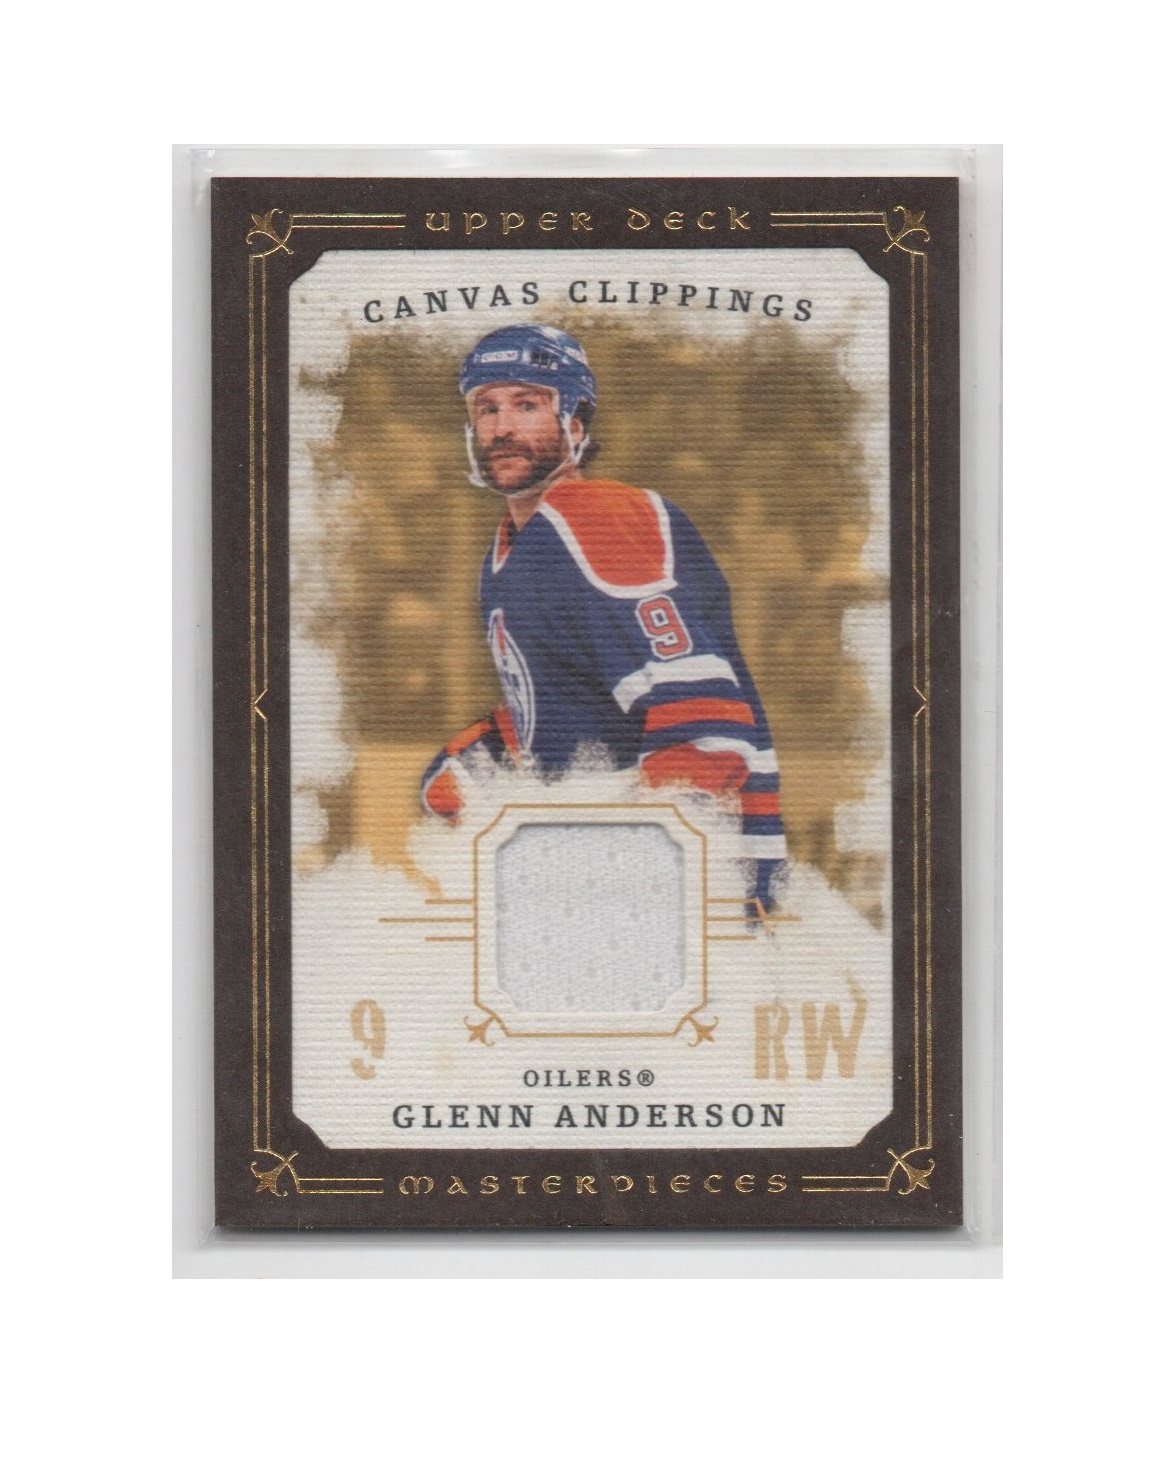 2008-09 UD Masterpieces Canvas Clippings Brown #CCGA2 Glenn Anderson (40-X122-OILERS)